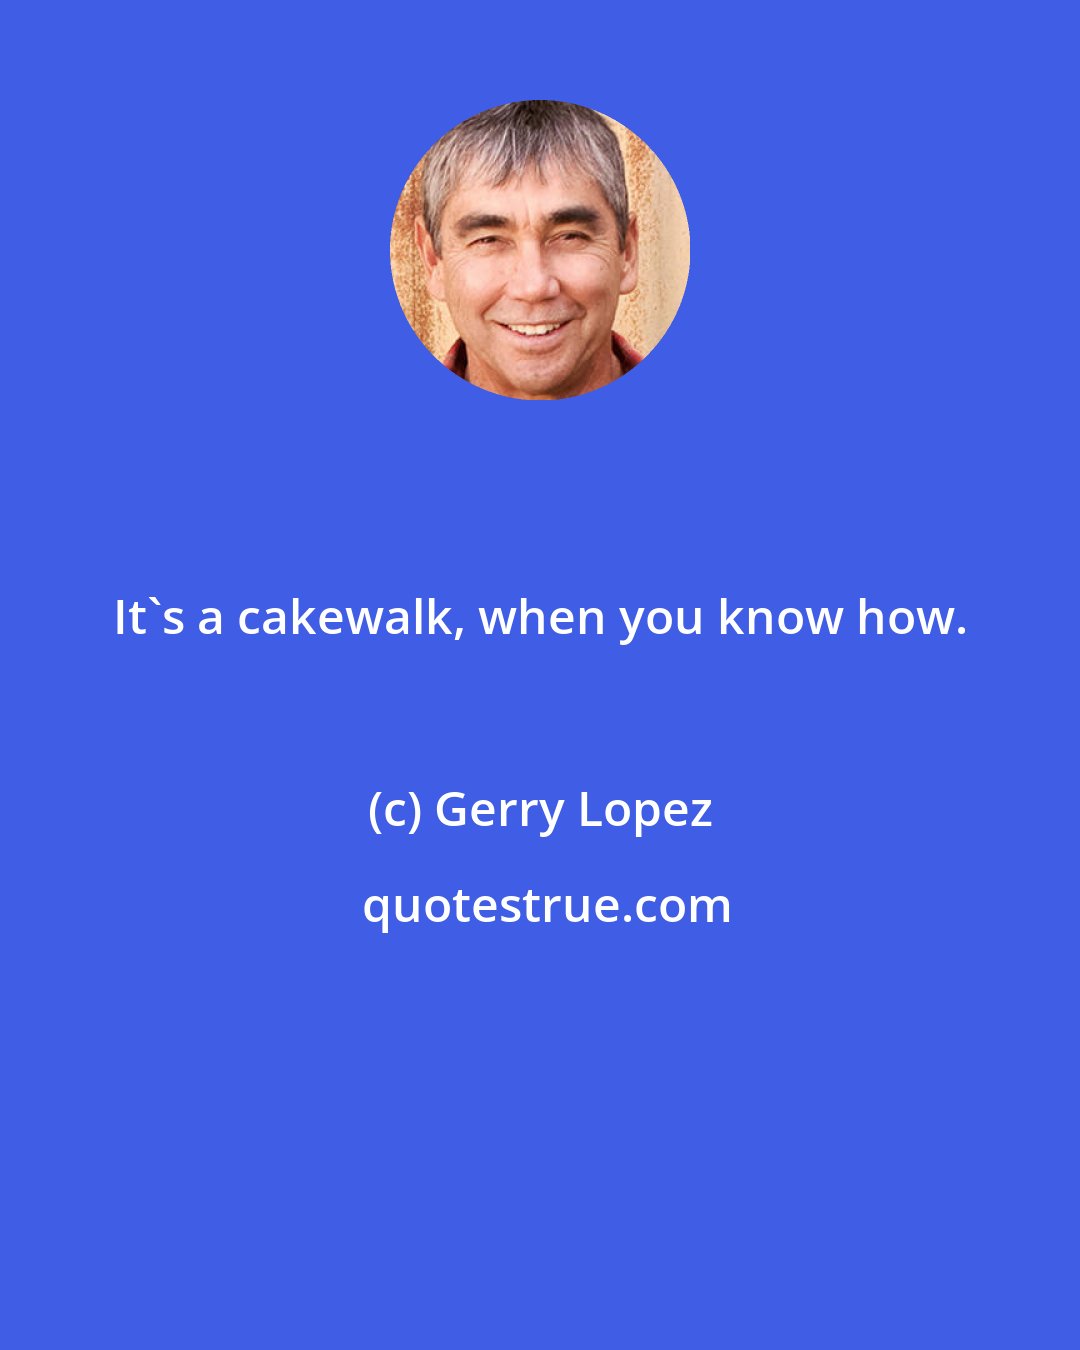 Gerry Lopez: It's a cakewalk, when you know how.